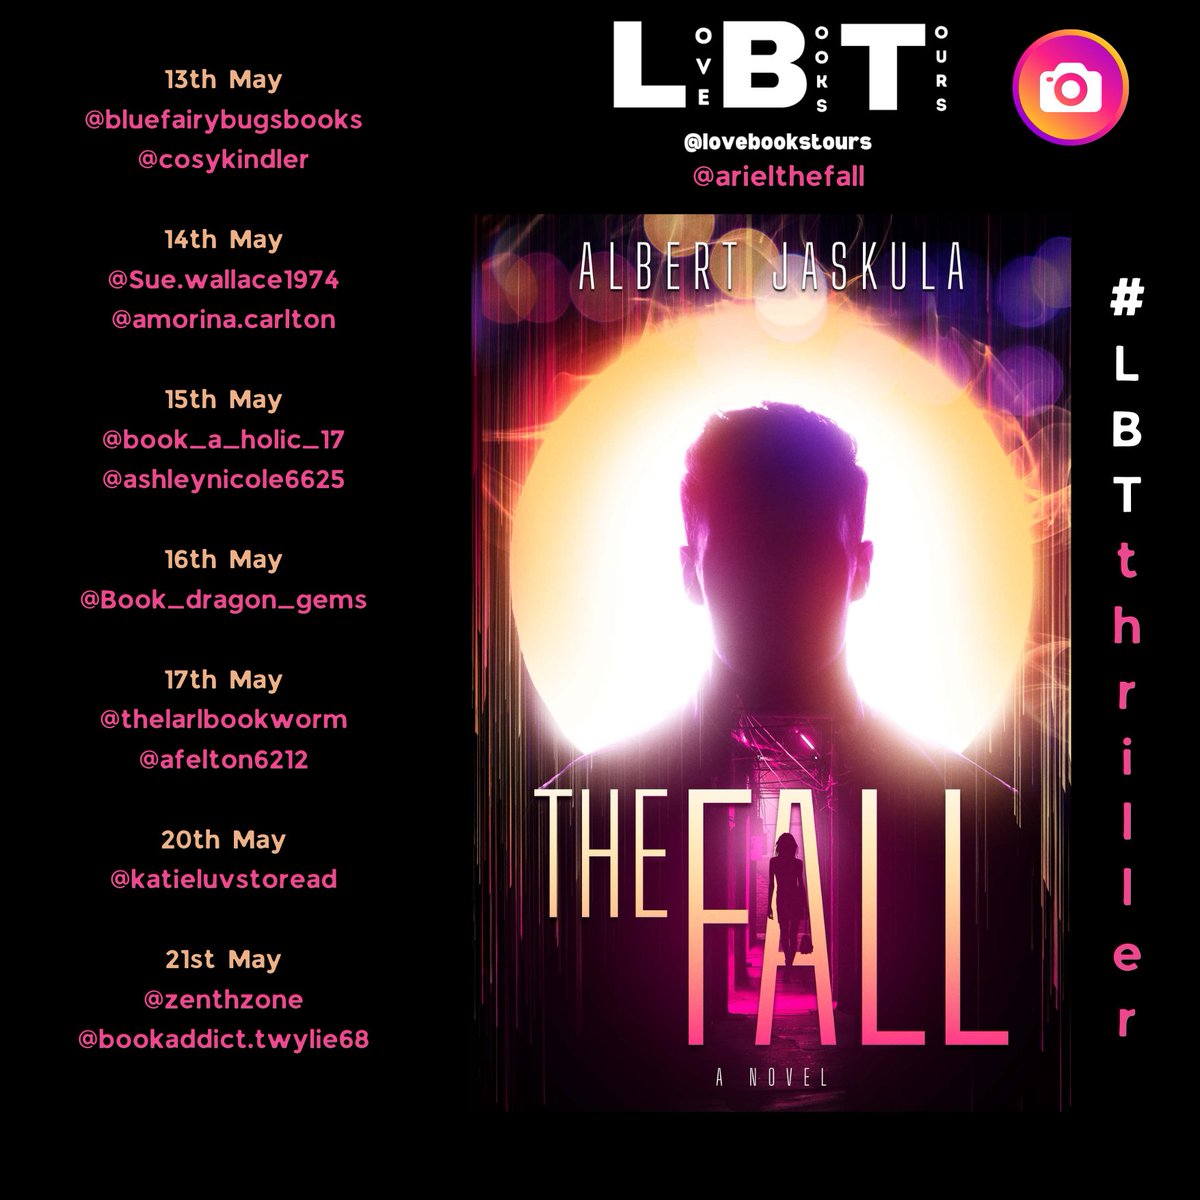 This MAY follow the #virtualbooktour for The Fall by Alberta Jaskula UK & US 13th – 21st May Genre: Thriller Follow the tour over on our Instagram and TikTok. instagram.com/lovebookstours